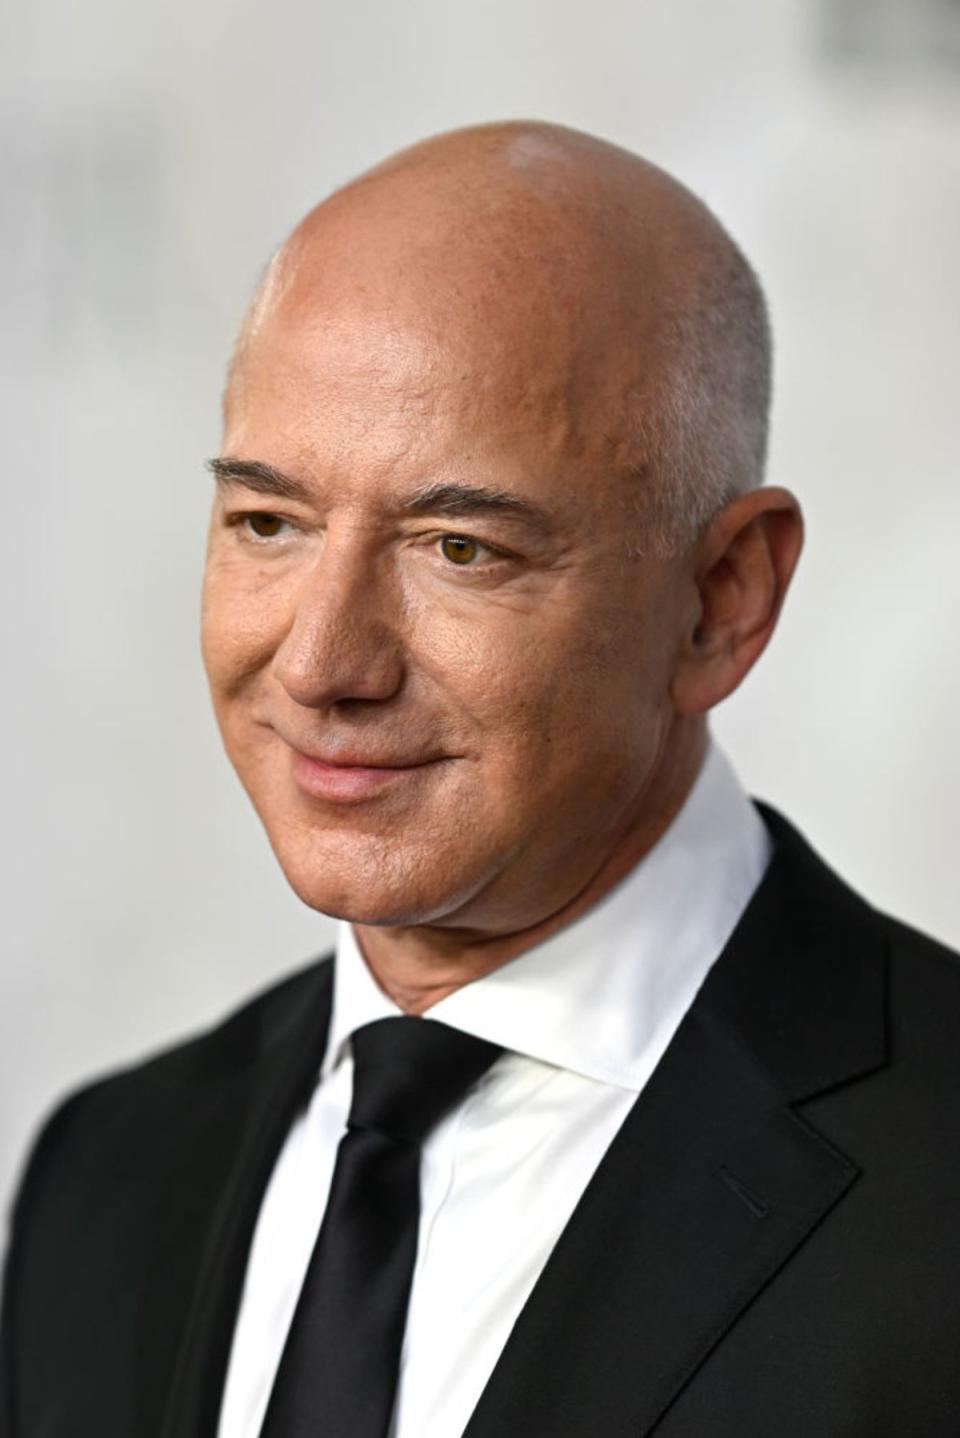 Big founder: Jeff Bezos in 2022 (Getty Images)